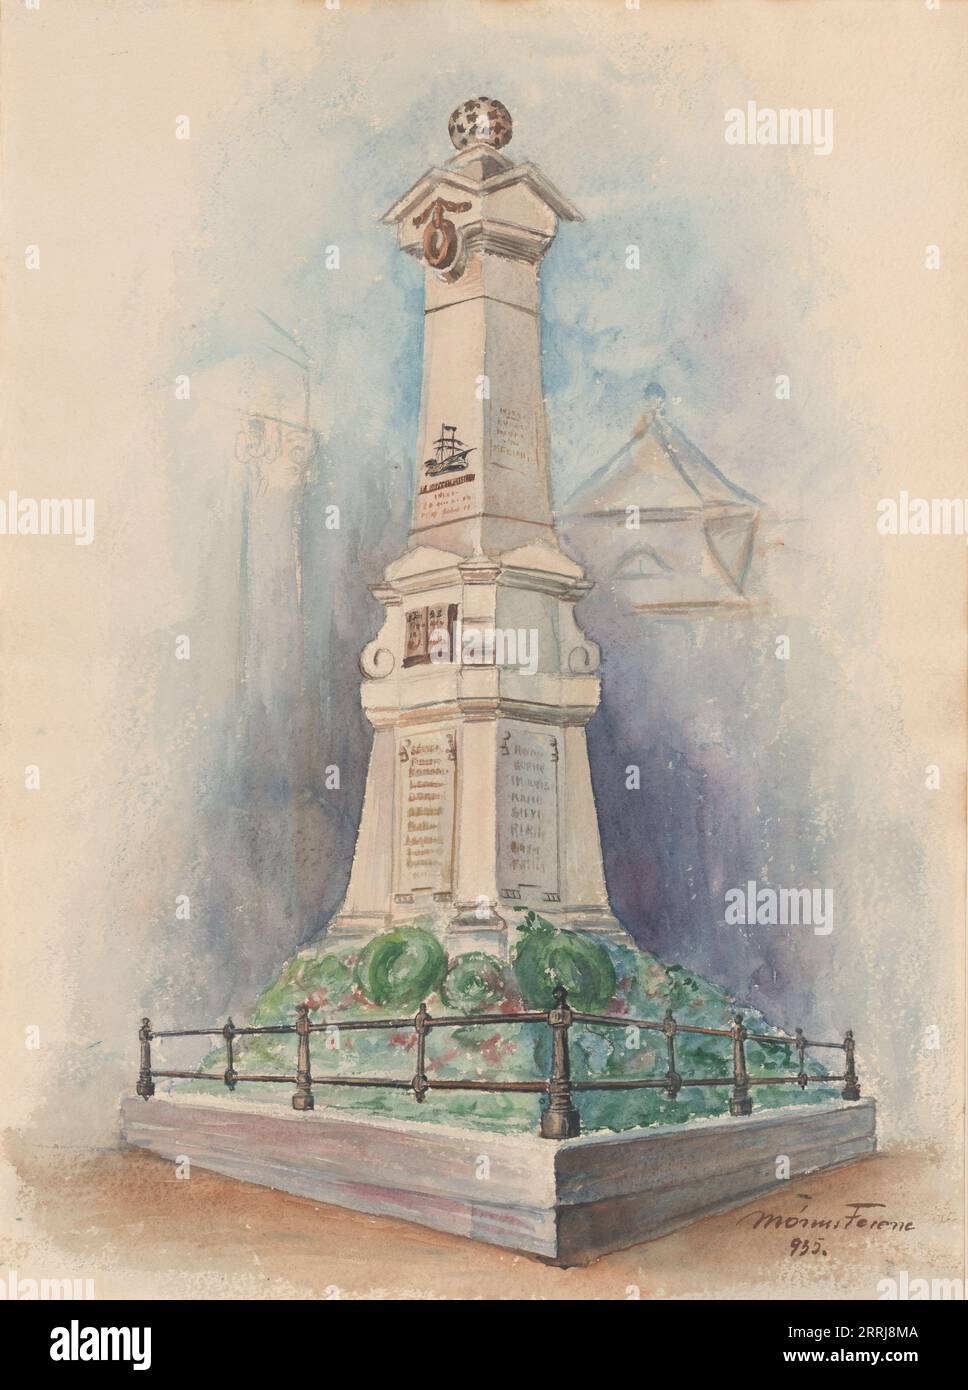 Memorial column for Lieutenant Admiral M.A. De Ruyter in Debrecen, 1900-1950. Watercolour of the memorial column, founded in Debrecen (Hungary) in 1895 to commemorate the redemption of the Hungarian preachers by Lieutenant Admiral M.A. De Ruyter on February 11, 1676. Stock Photo